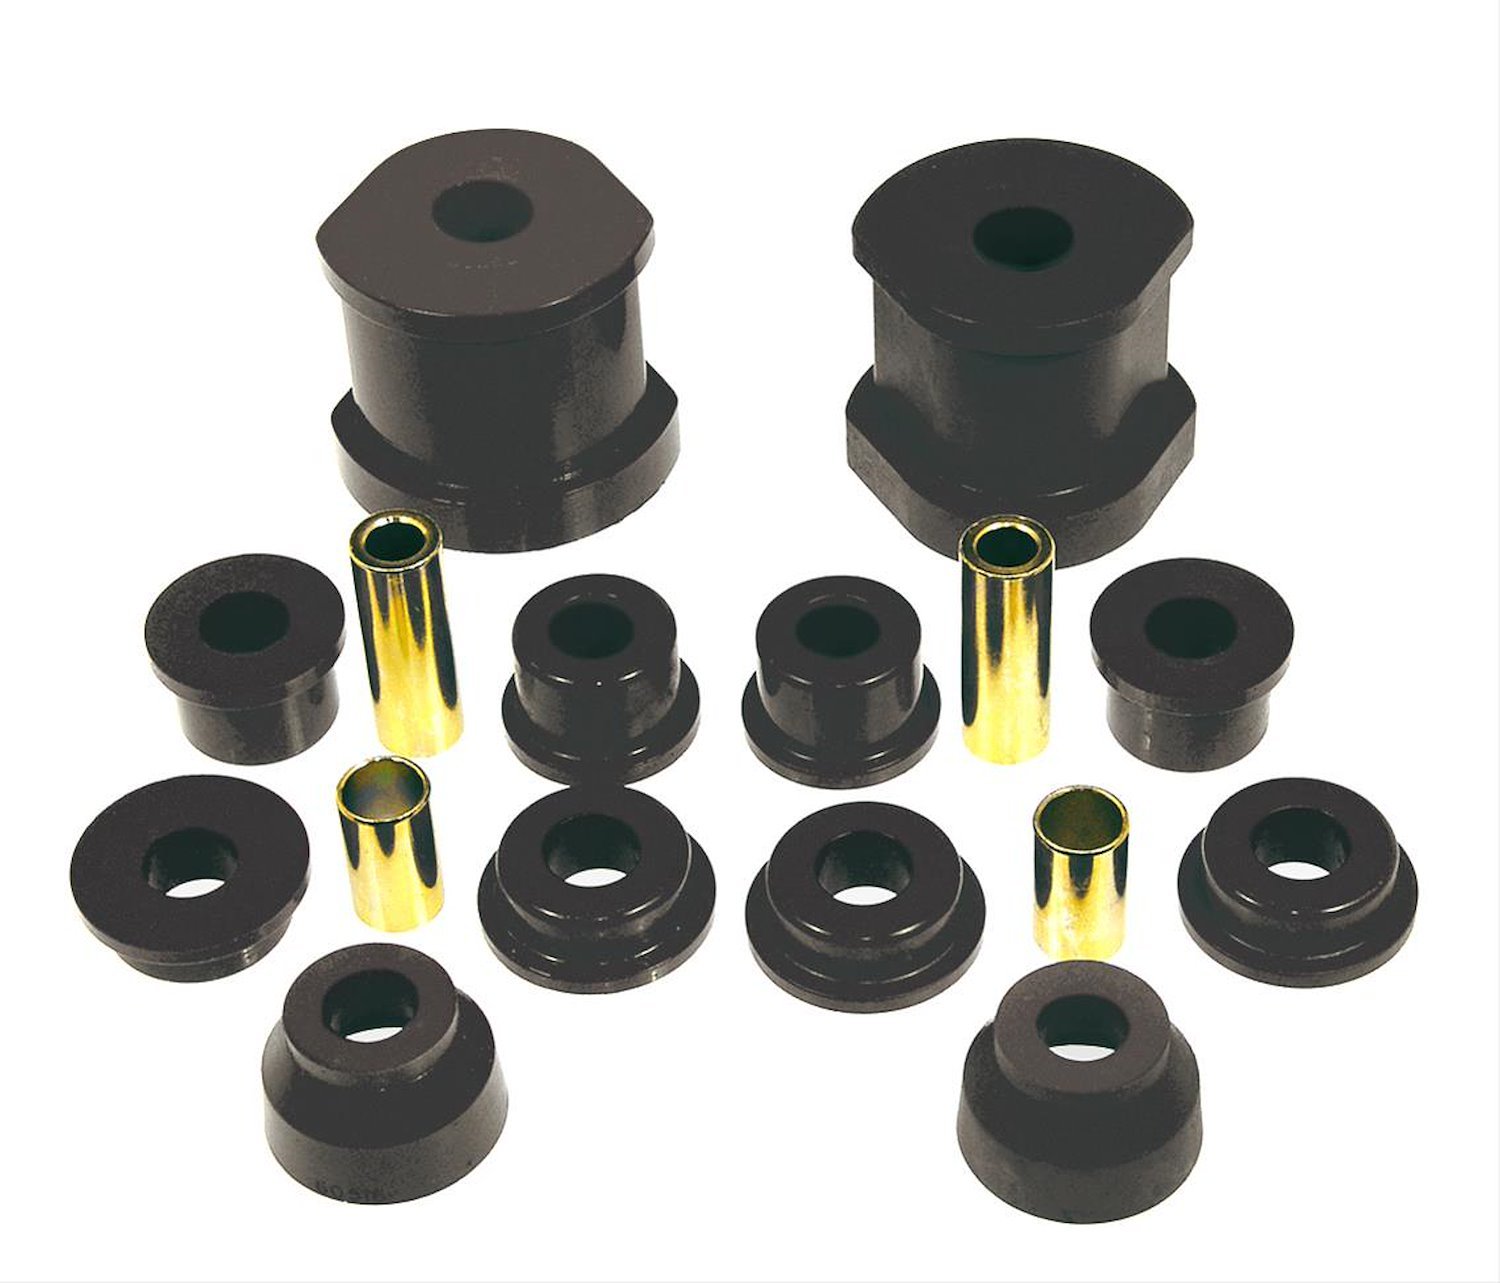 4-227-BL Front Lower Control Arm Bushings for 1994-1999 Dodge Stealth [Black]